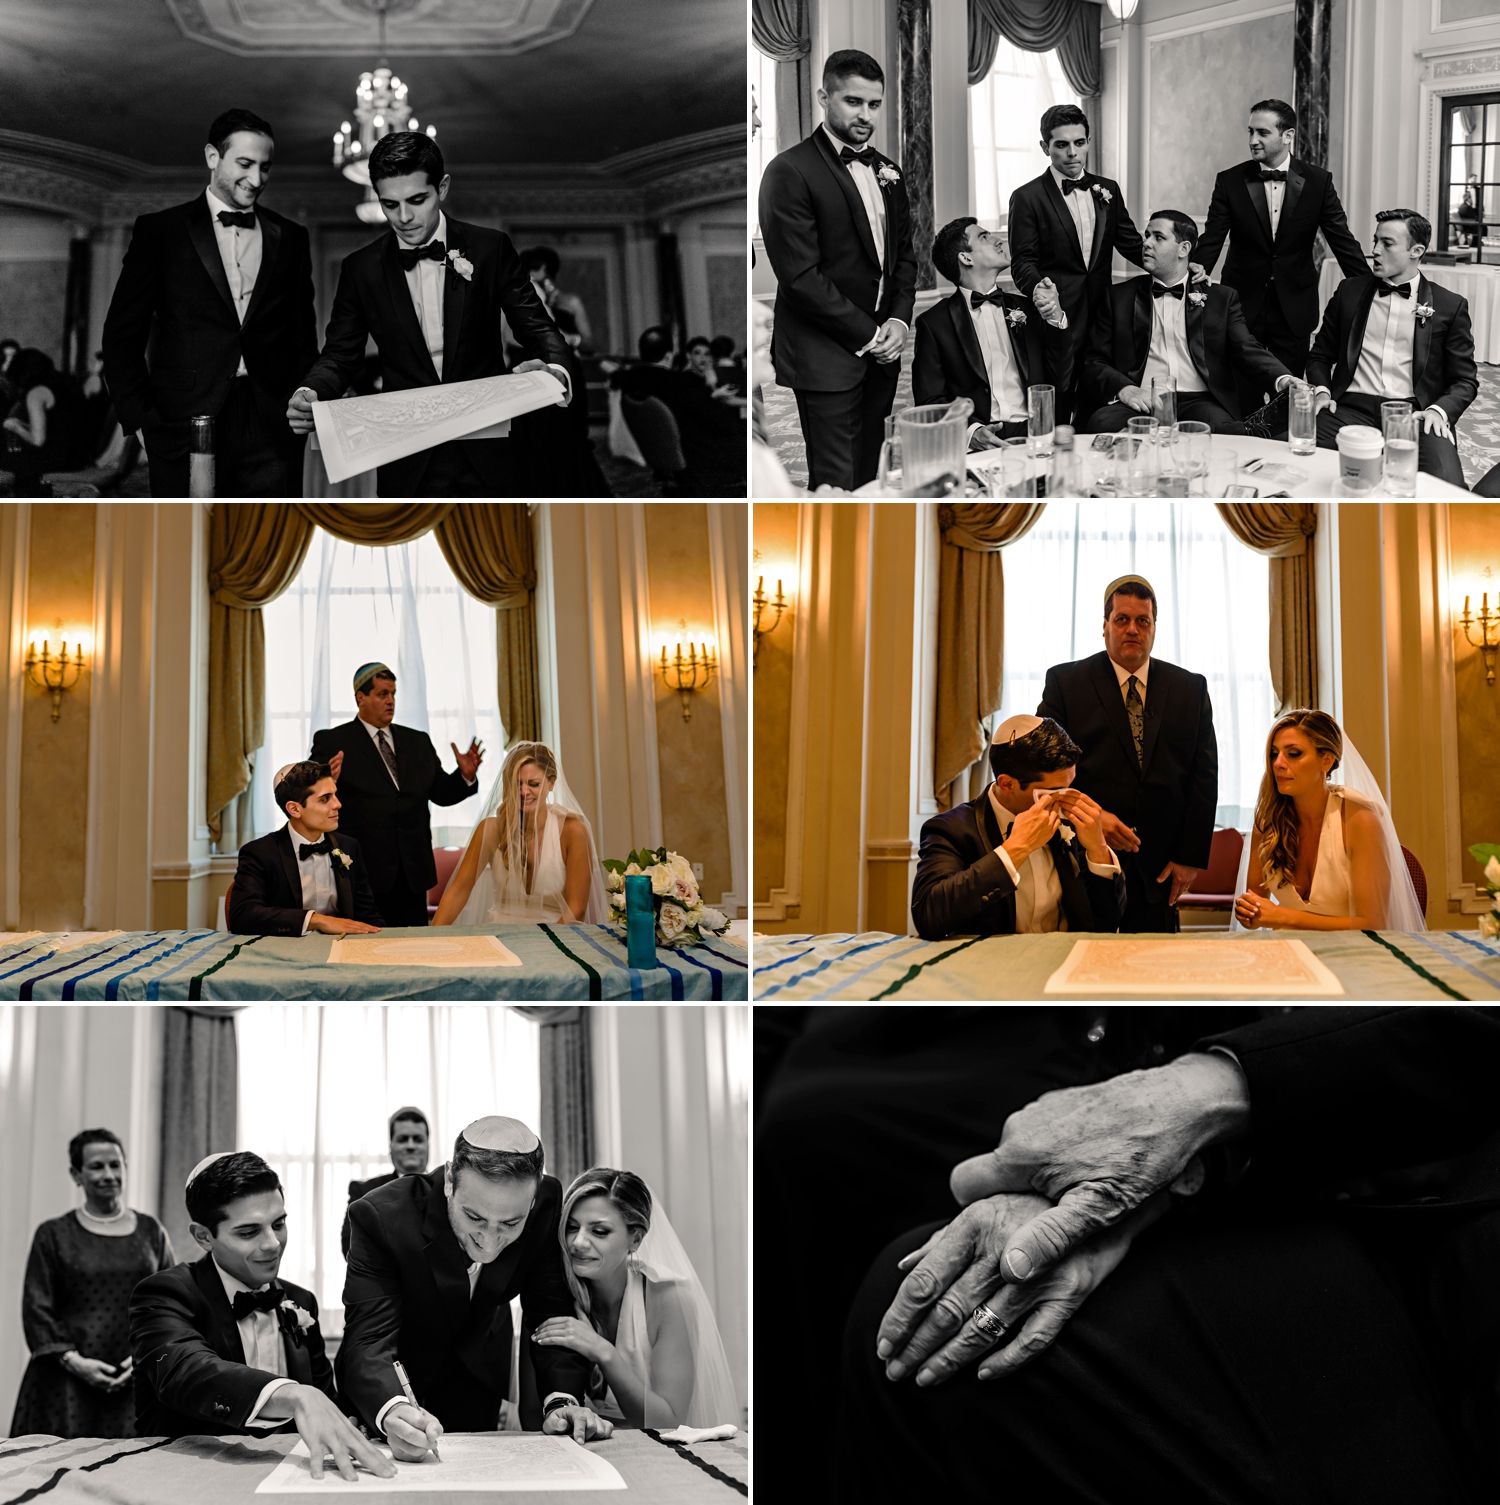 photos of candid moments during the ketubah signing during a jewish wedding at the chateau laurier wedding in ottawa ontario